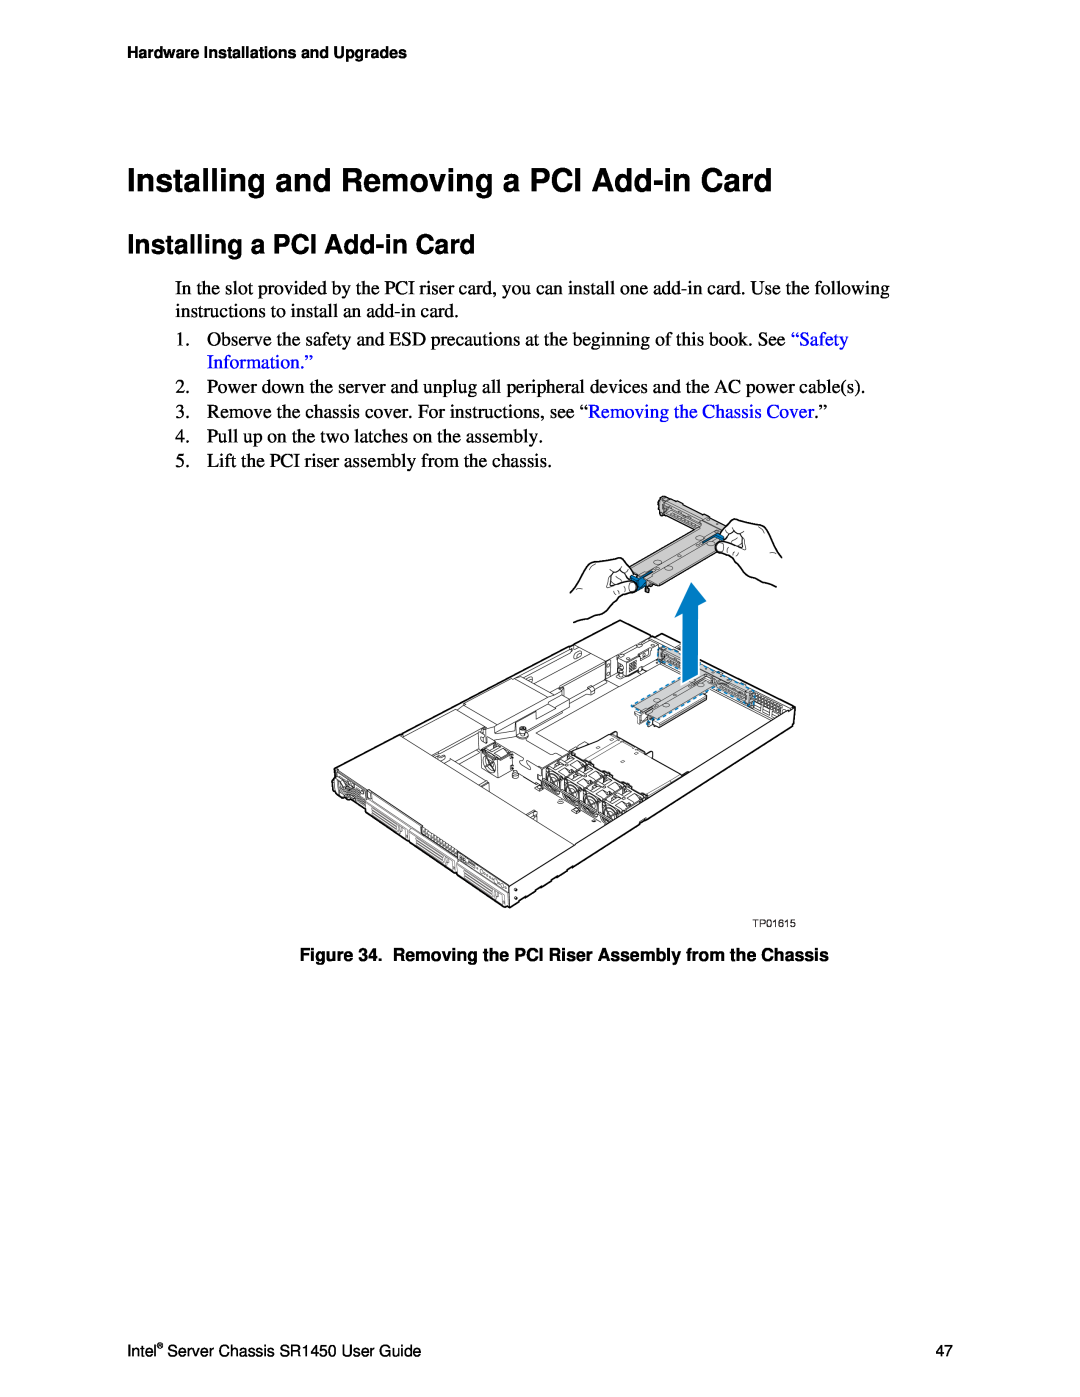 Intel SR1450 manual Installing and Removing a PCI Add-inCard, Installing a PCI Add-inCard 